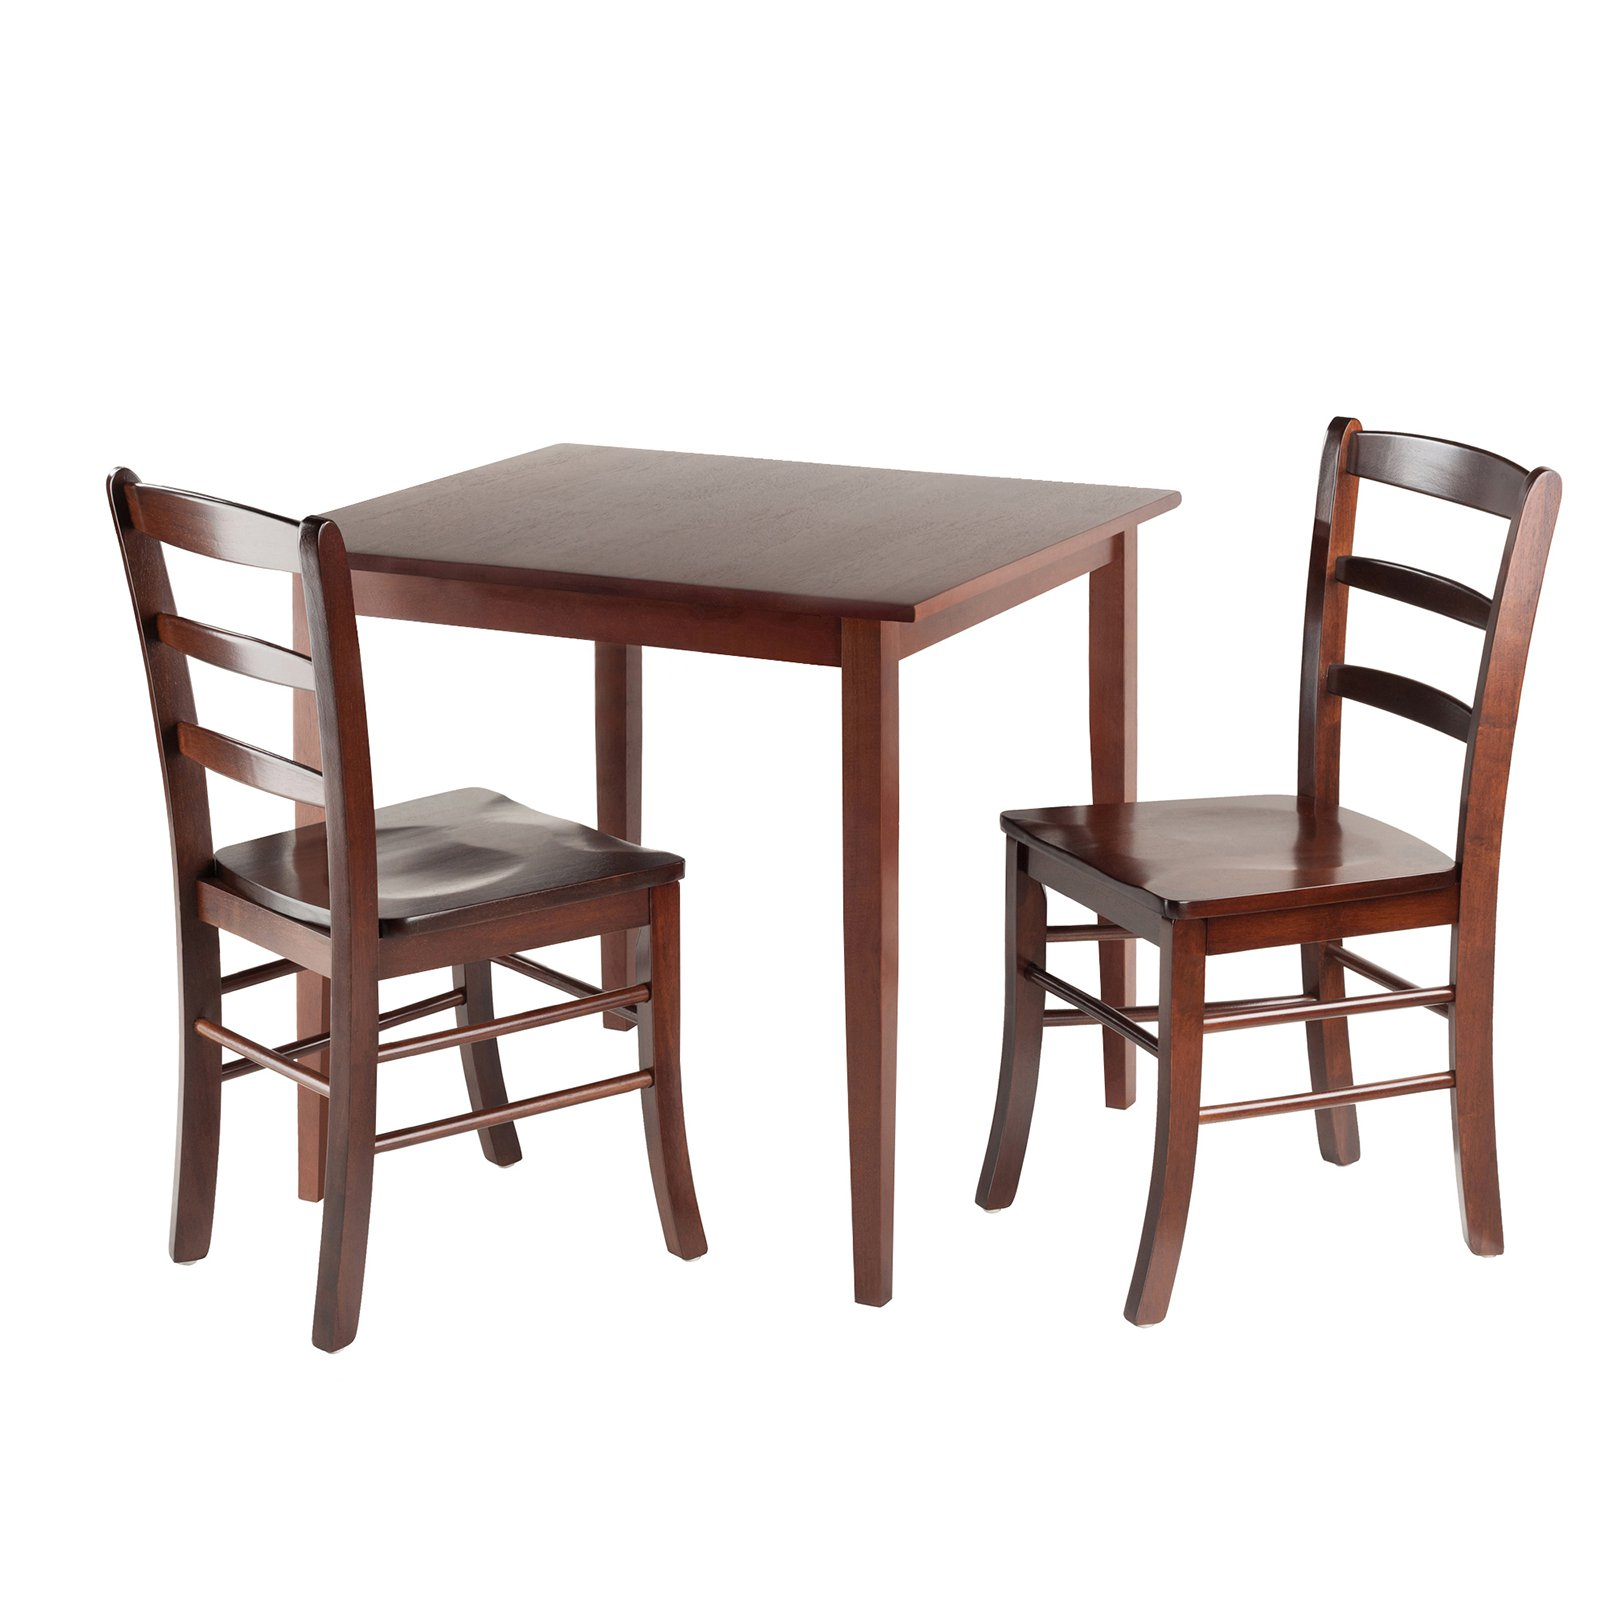 Winsome Groveland Square Dining Table With 2 Chairs 3 Piece Walmart inside size 1600 X 1600